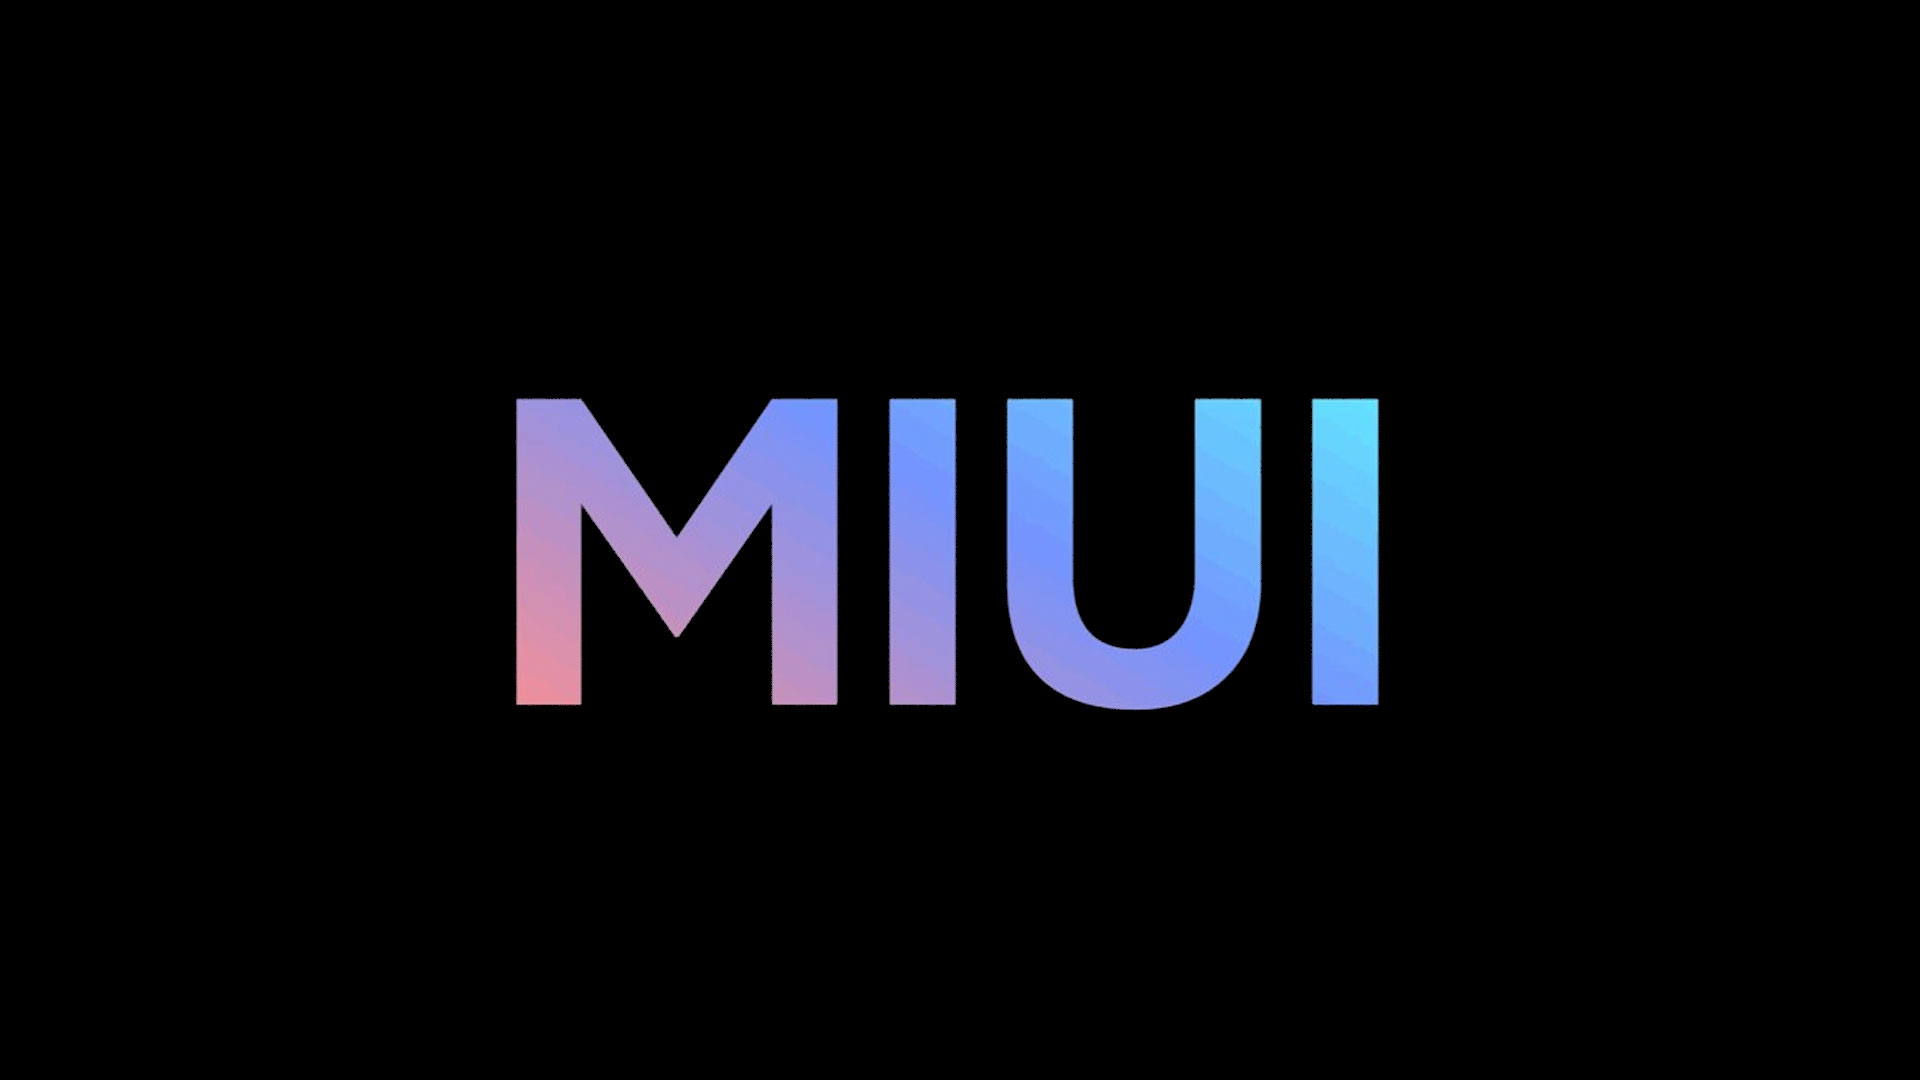 MIUI has surpassed 600 million monthly users - an increase of 100 million in a year and a half